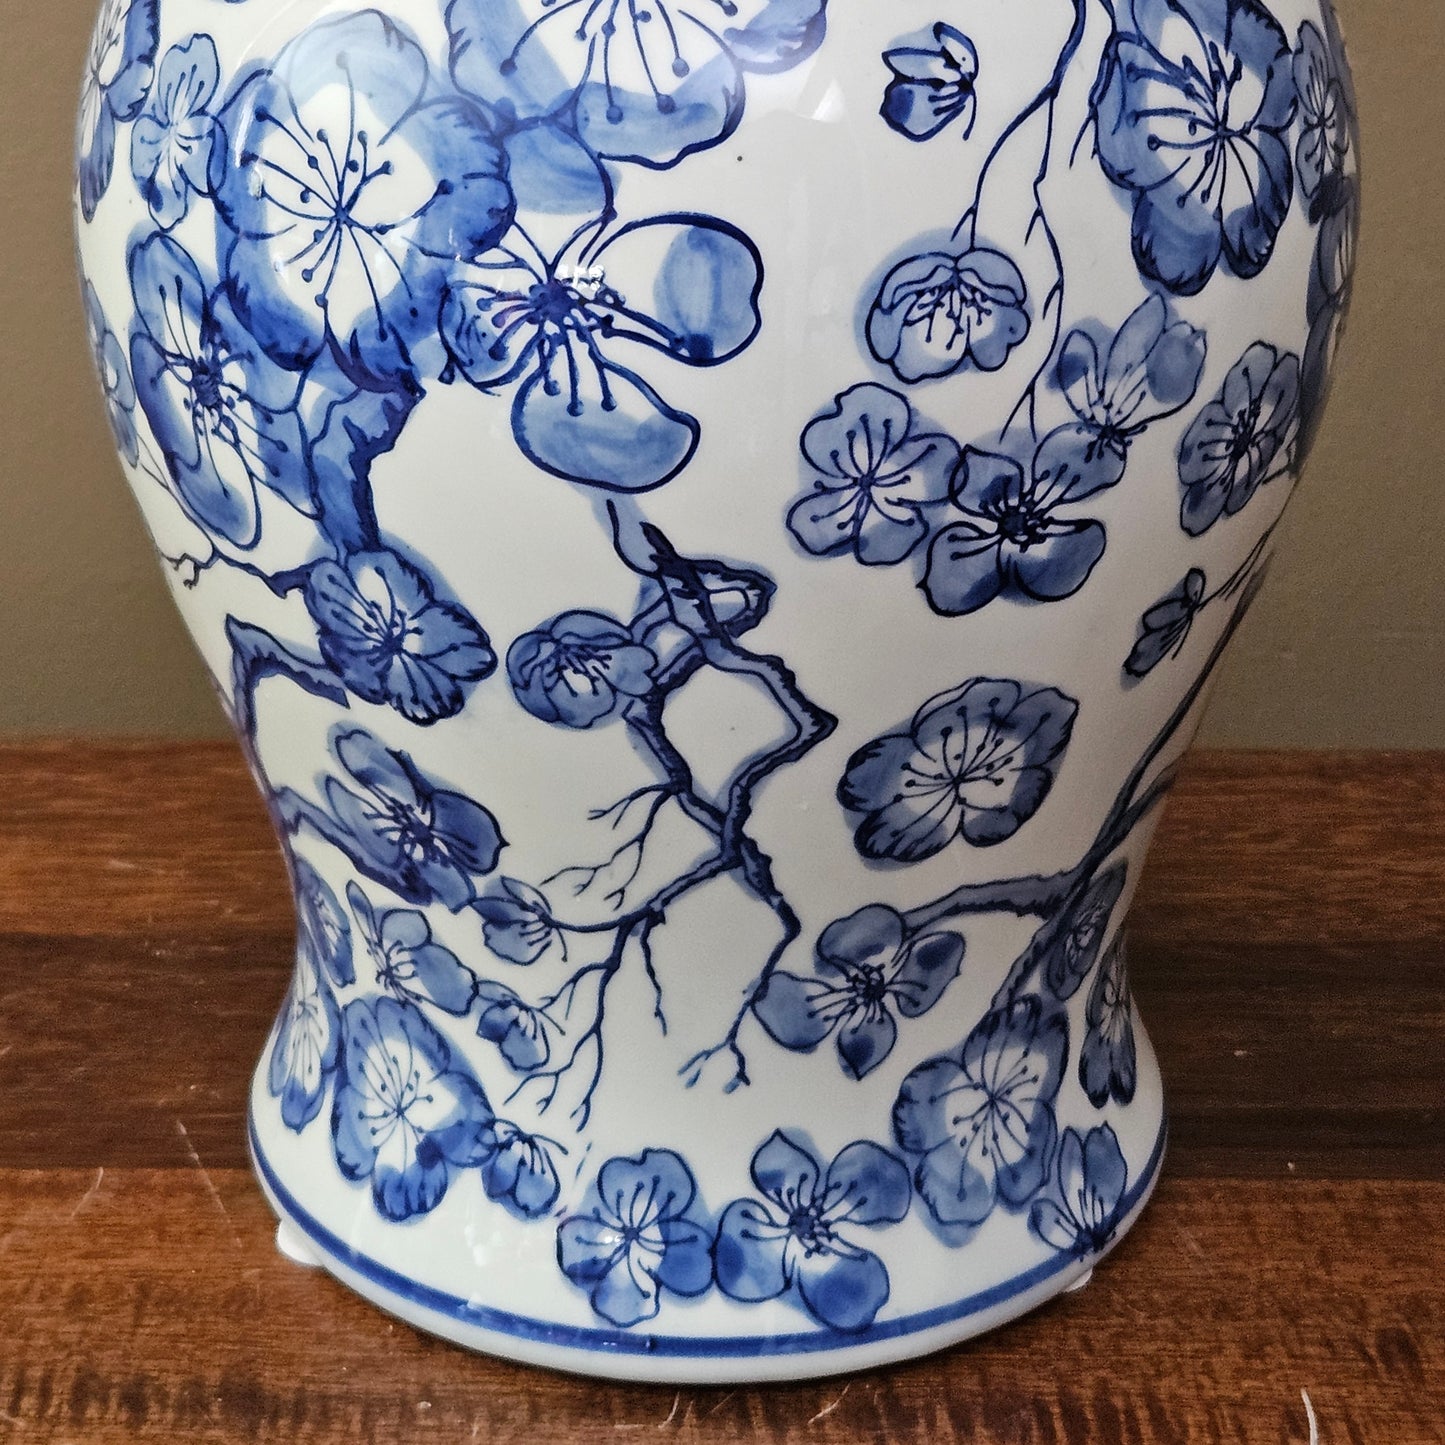 15" Blue & White Floral Porcelain Ginger Jar with Lid & Gold Accents ~ 6 Available